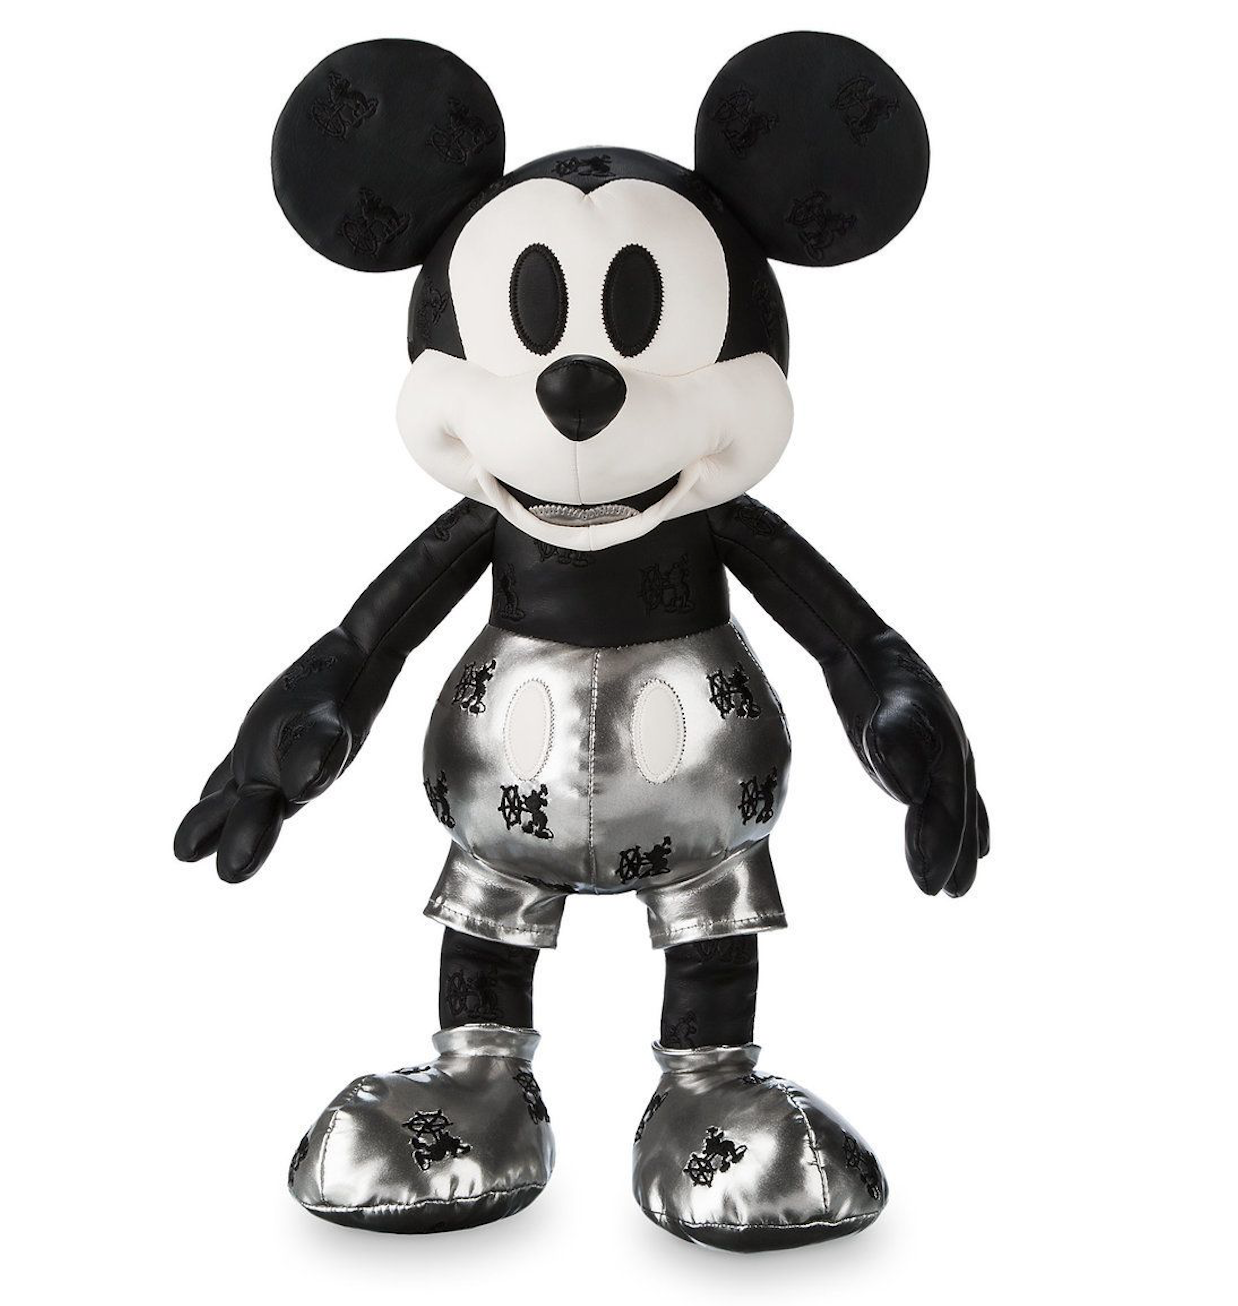 Disney Mickey Mouse Memories Plush - January 2018 - Limited Edition